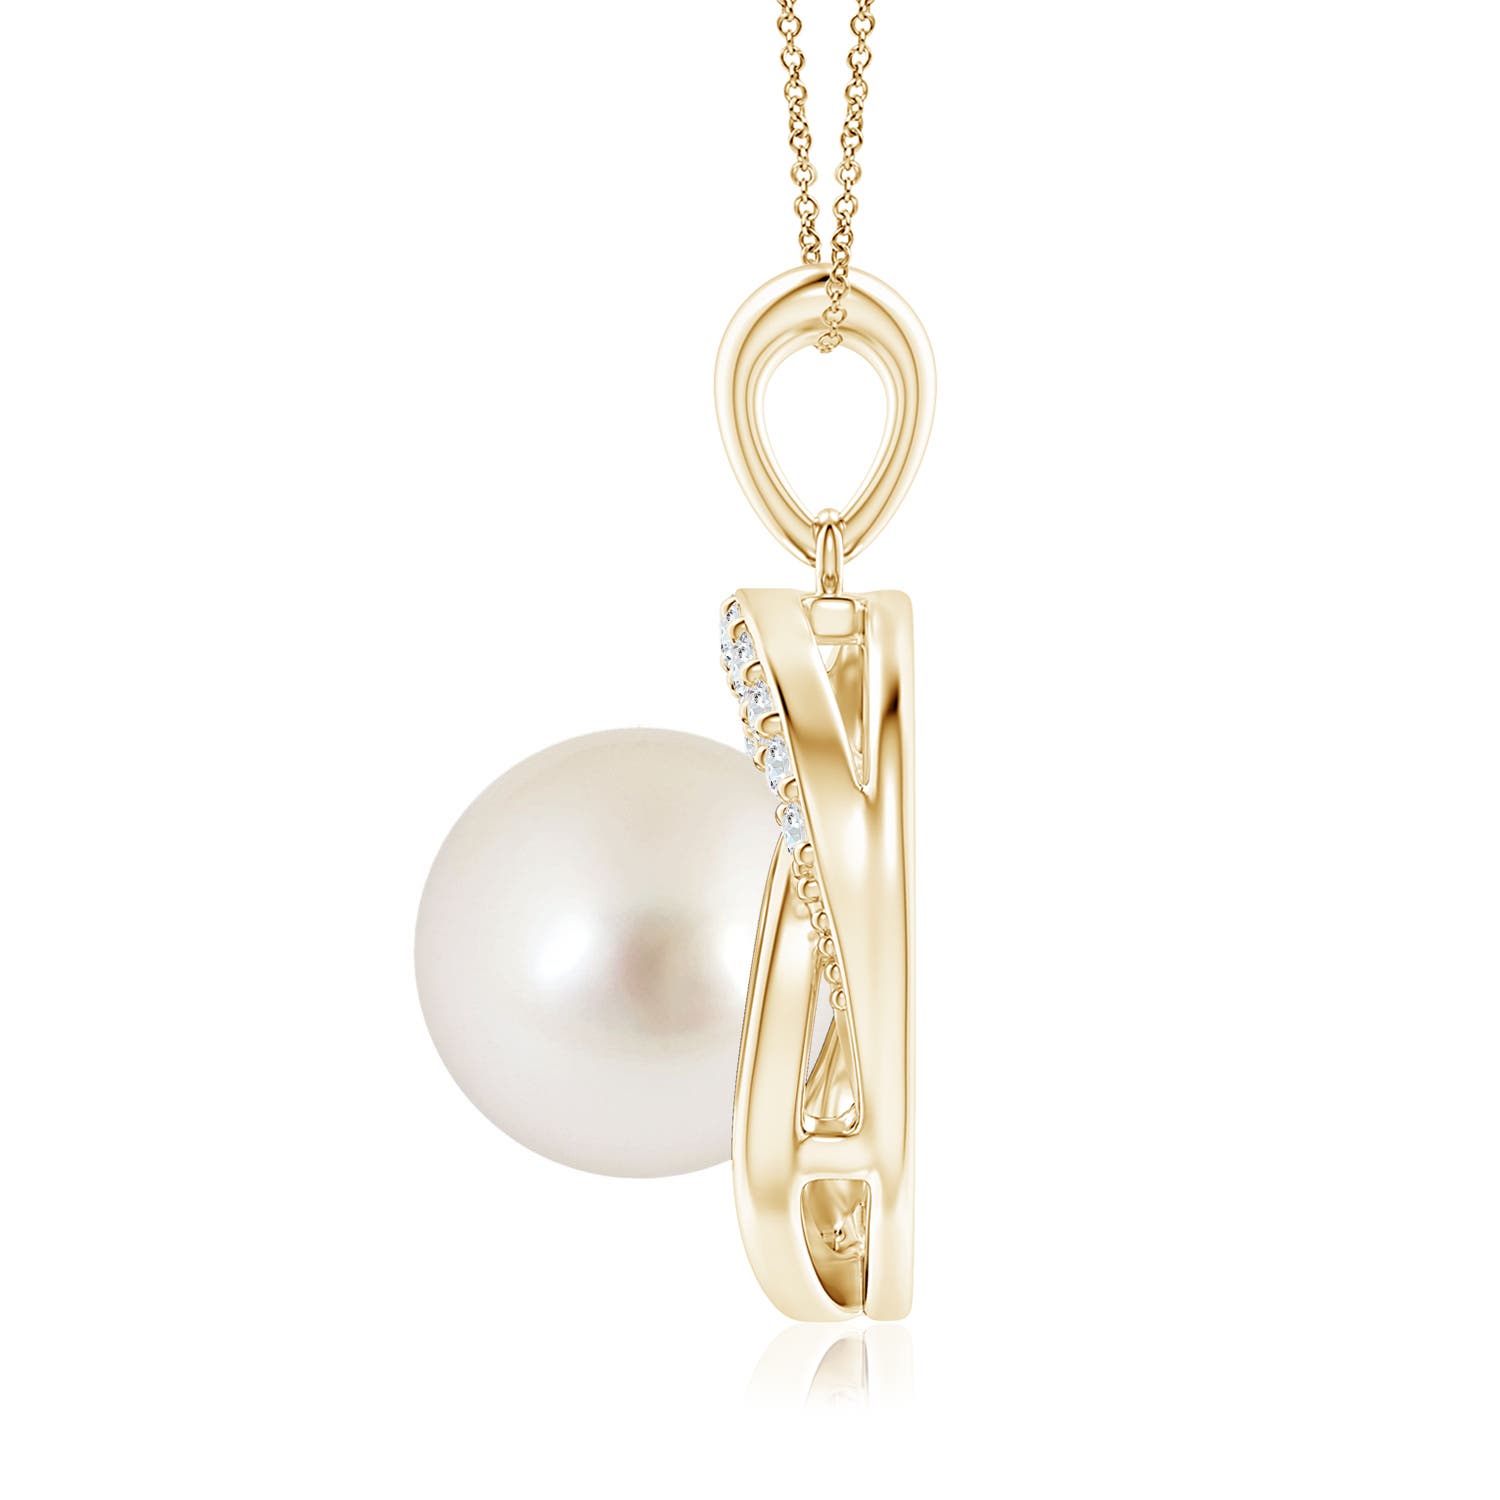 AAAA - South Sea Cultured Pearl / 7.33 CT / 14 KT Yellow Gold